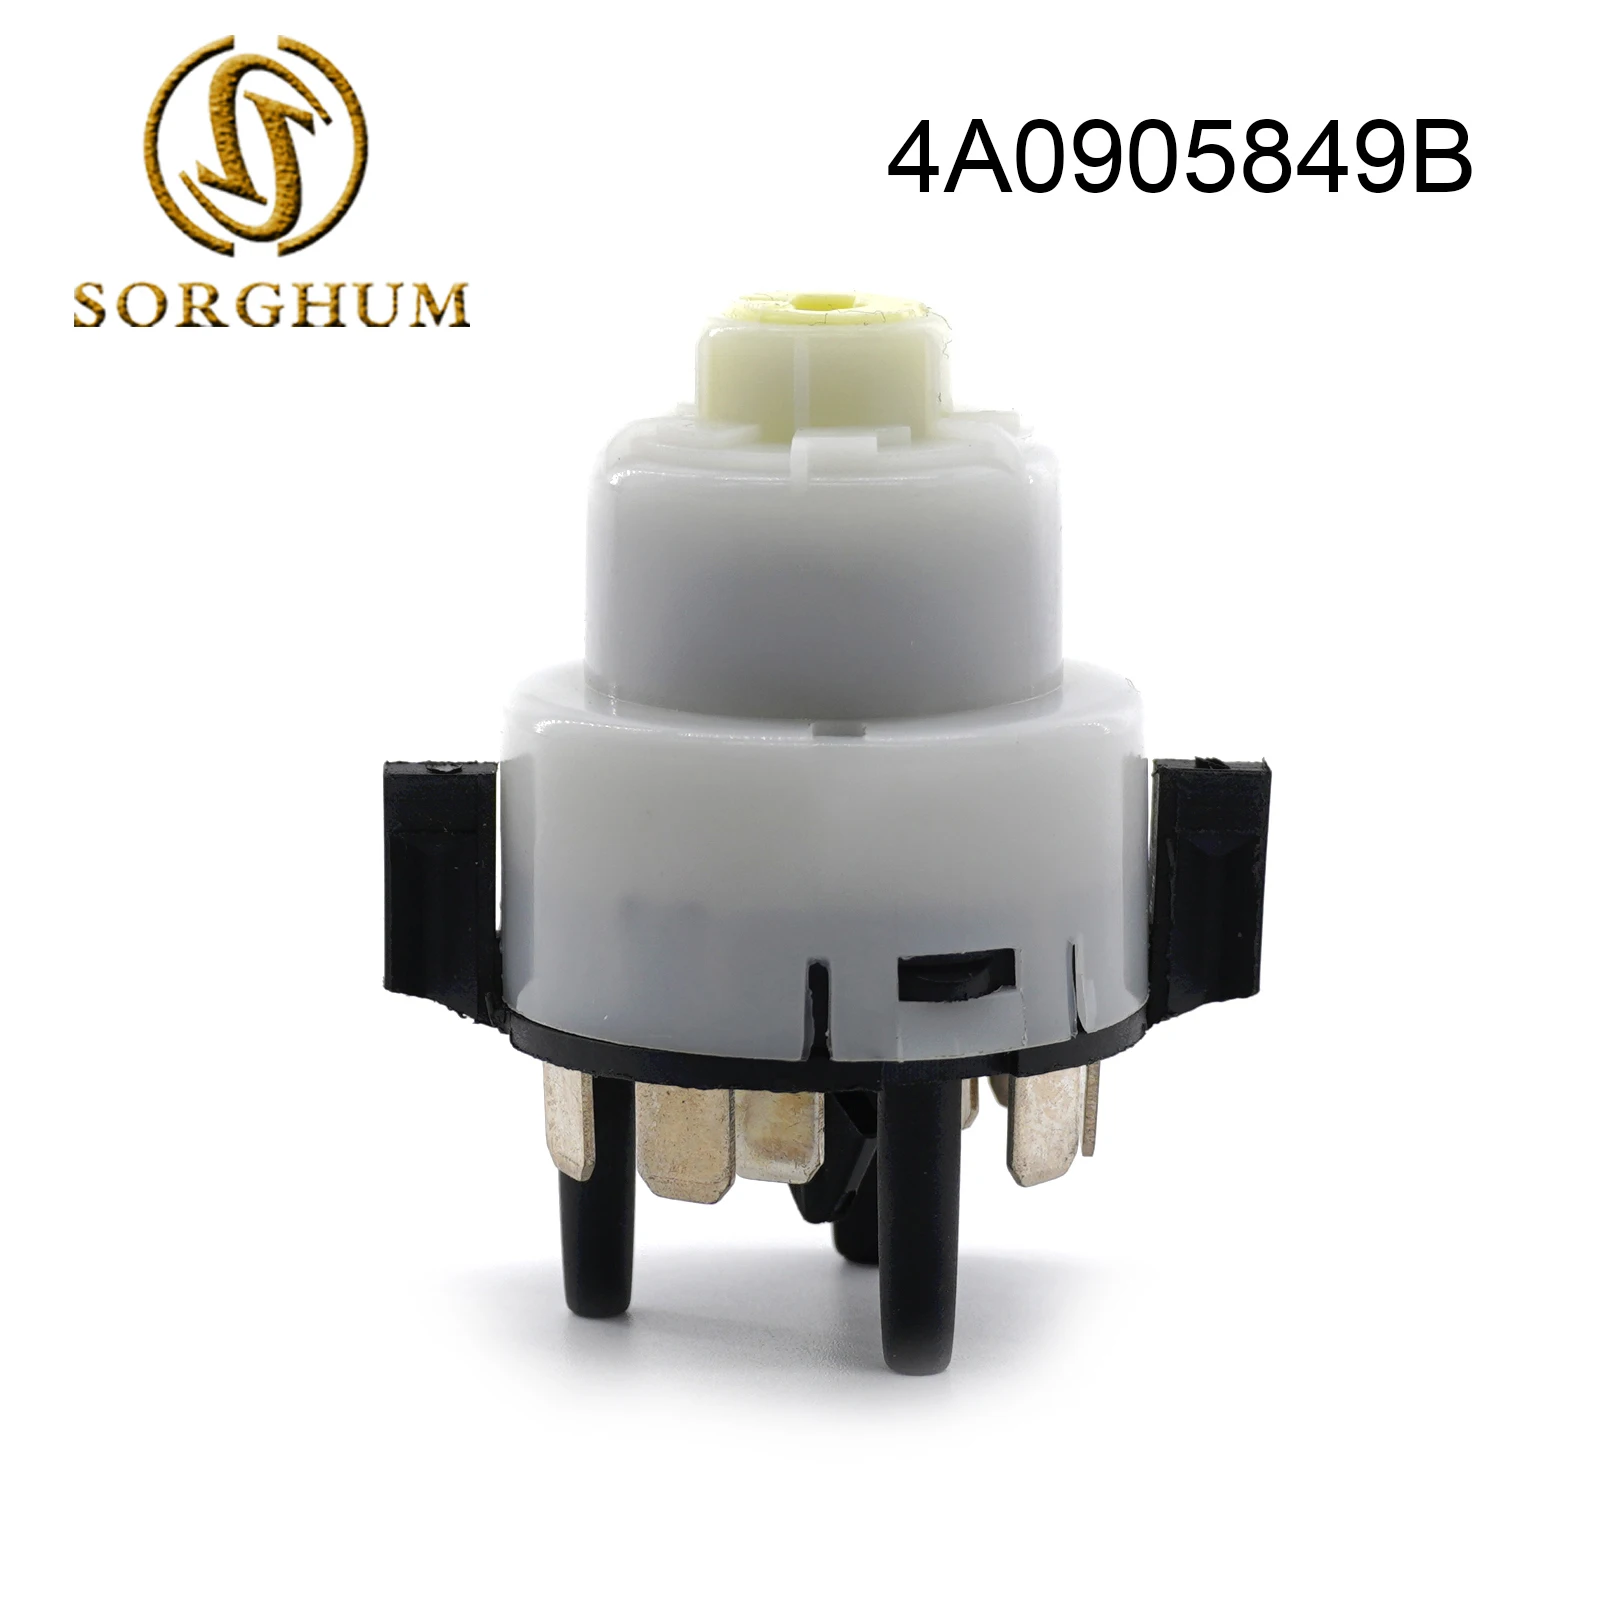 

Sorghum Car Ignition Switch Starter Control Switch 4A0905849B 4A0 905 849 B For Audi A3 A4 Avant A6 Avant 80 100 For VW Passat